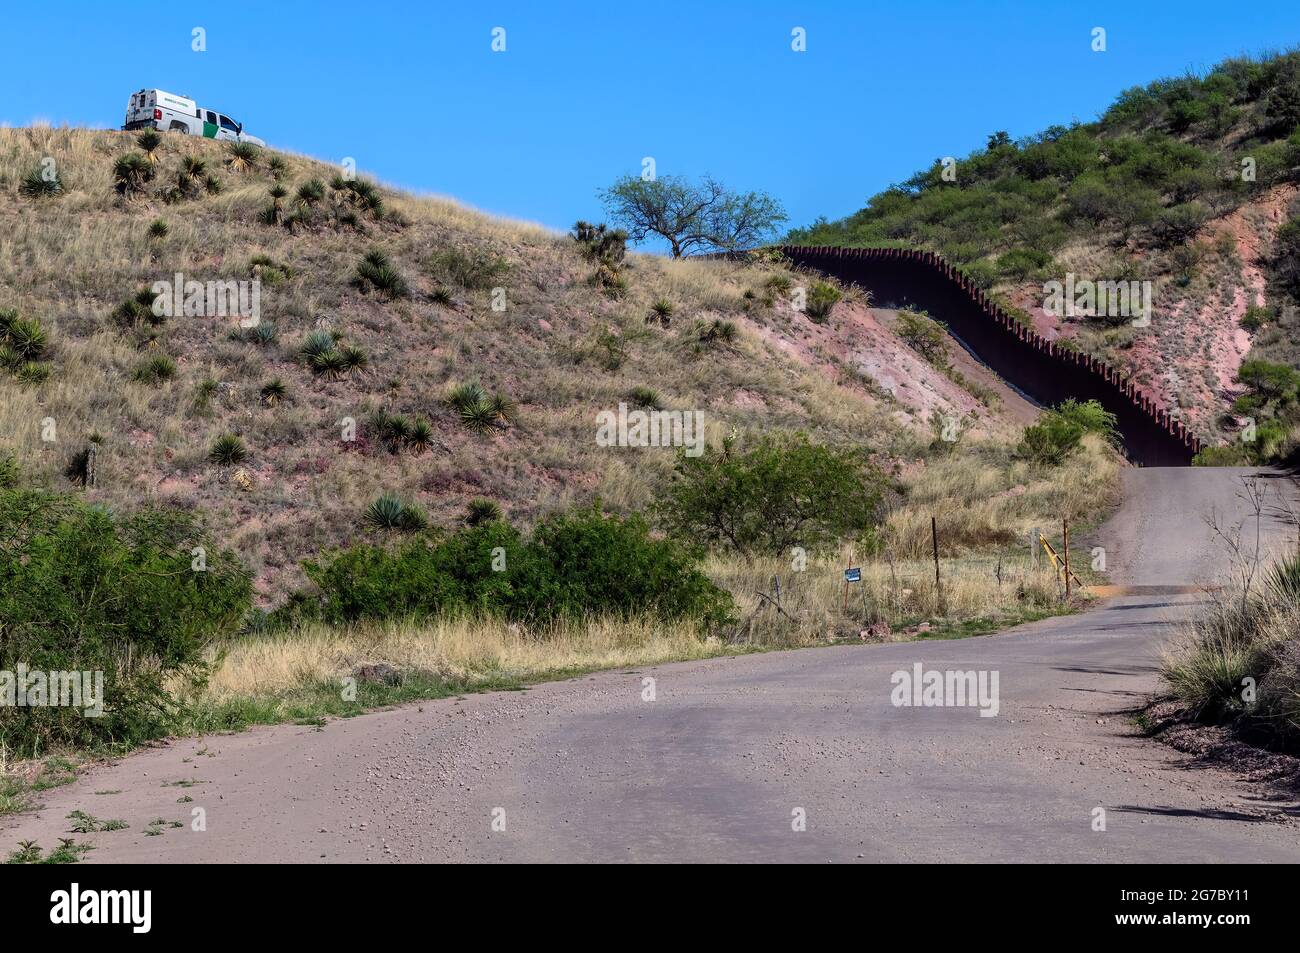 US border fence on the Mexico border, east of Nogales Arizona USA and Nogales Sonora Mexico, viewed from US side. This type of barrier is “bollard” st Stock Photo